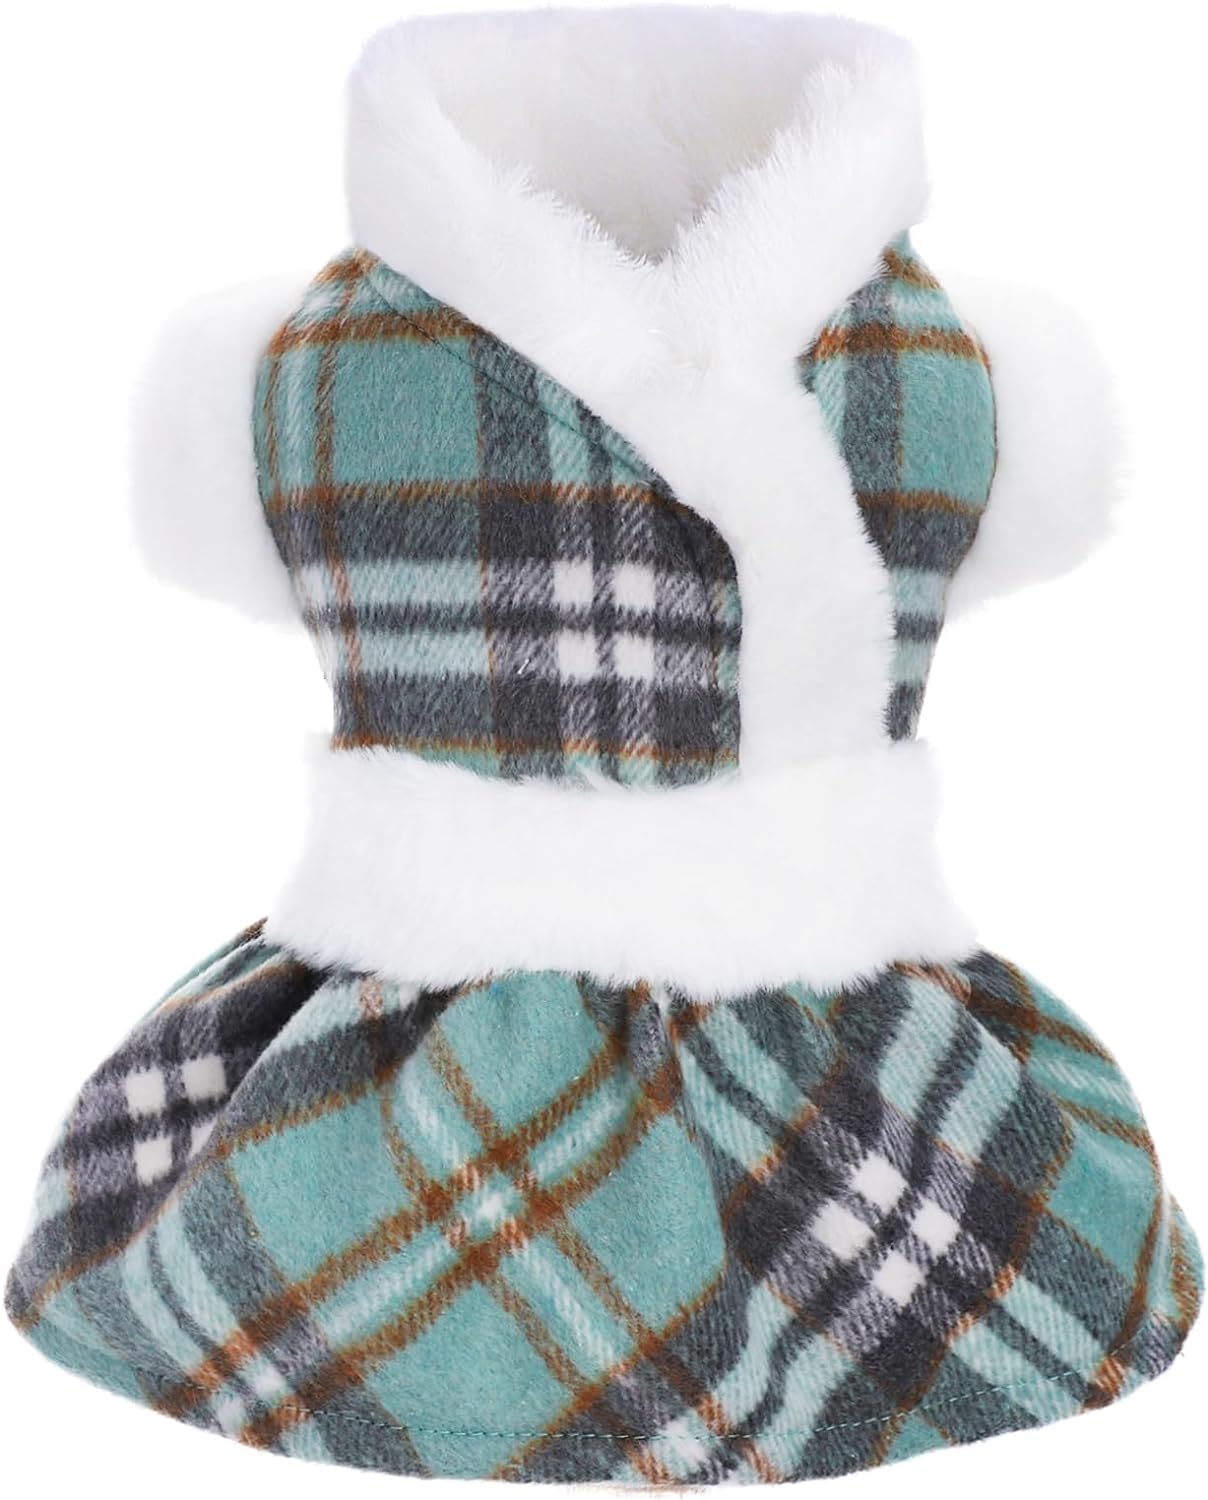 Girl Dog Sweater, Fleece Dog Dresses for Small Dogs Girl, Puppy Sweater Dog Winter Clothes, Pet Clothing Dog Sweater Dress Dog Outfit (Small, Greener)